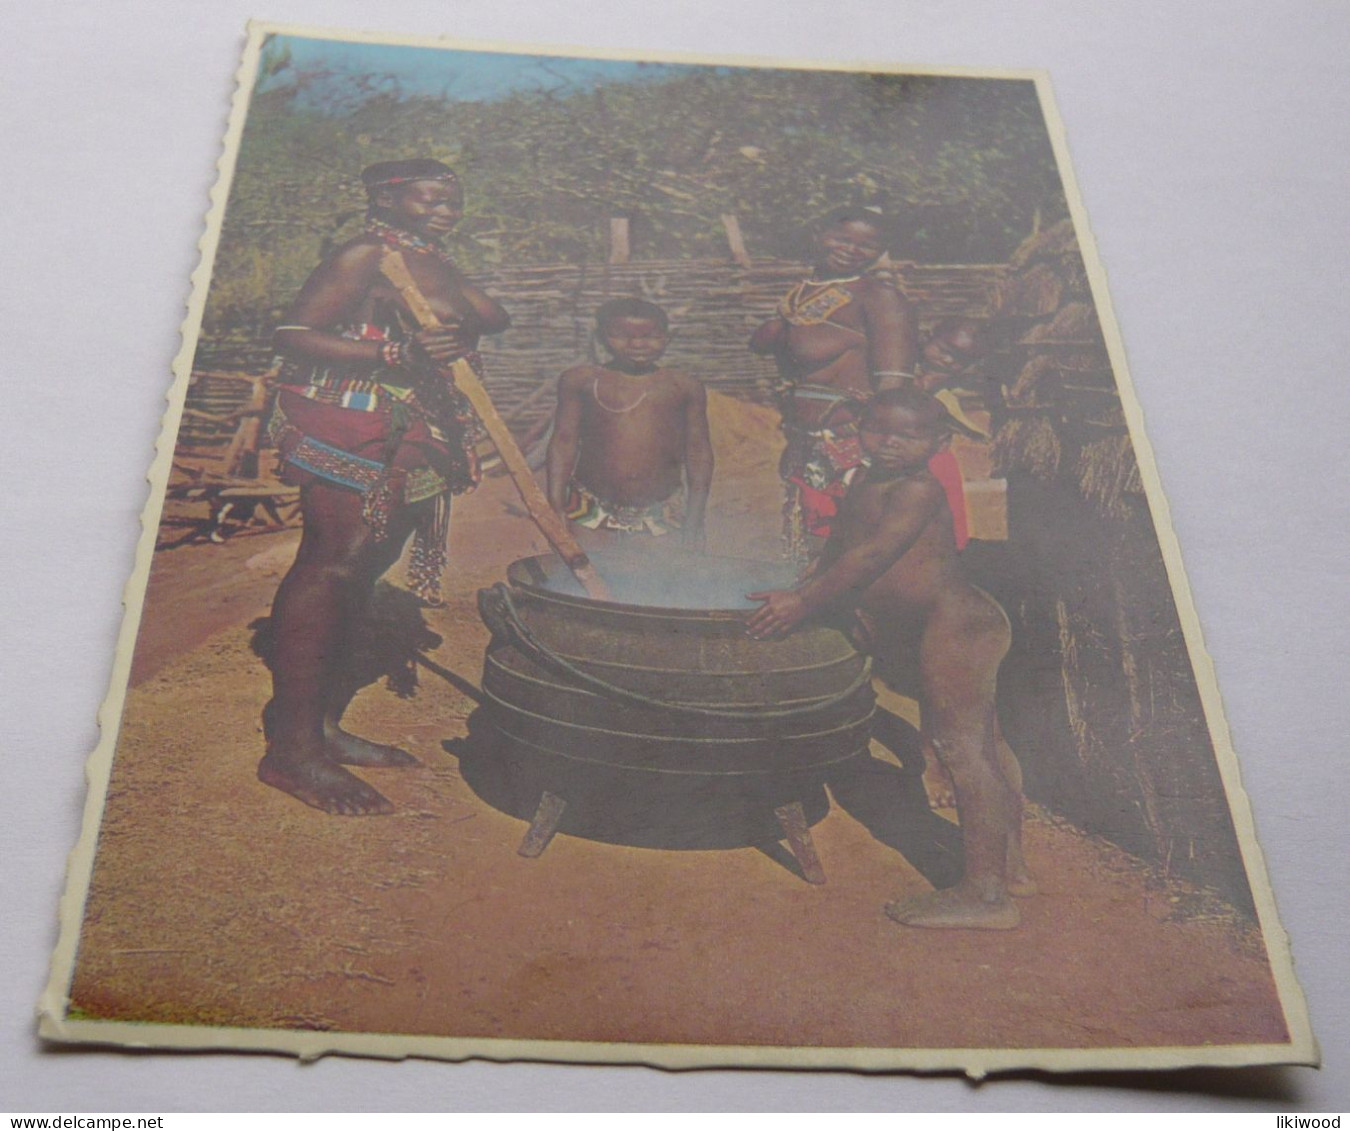 Africans With Cooking Pot - South Africa